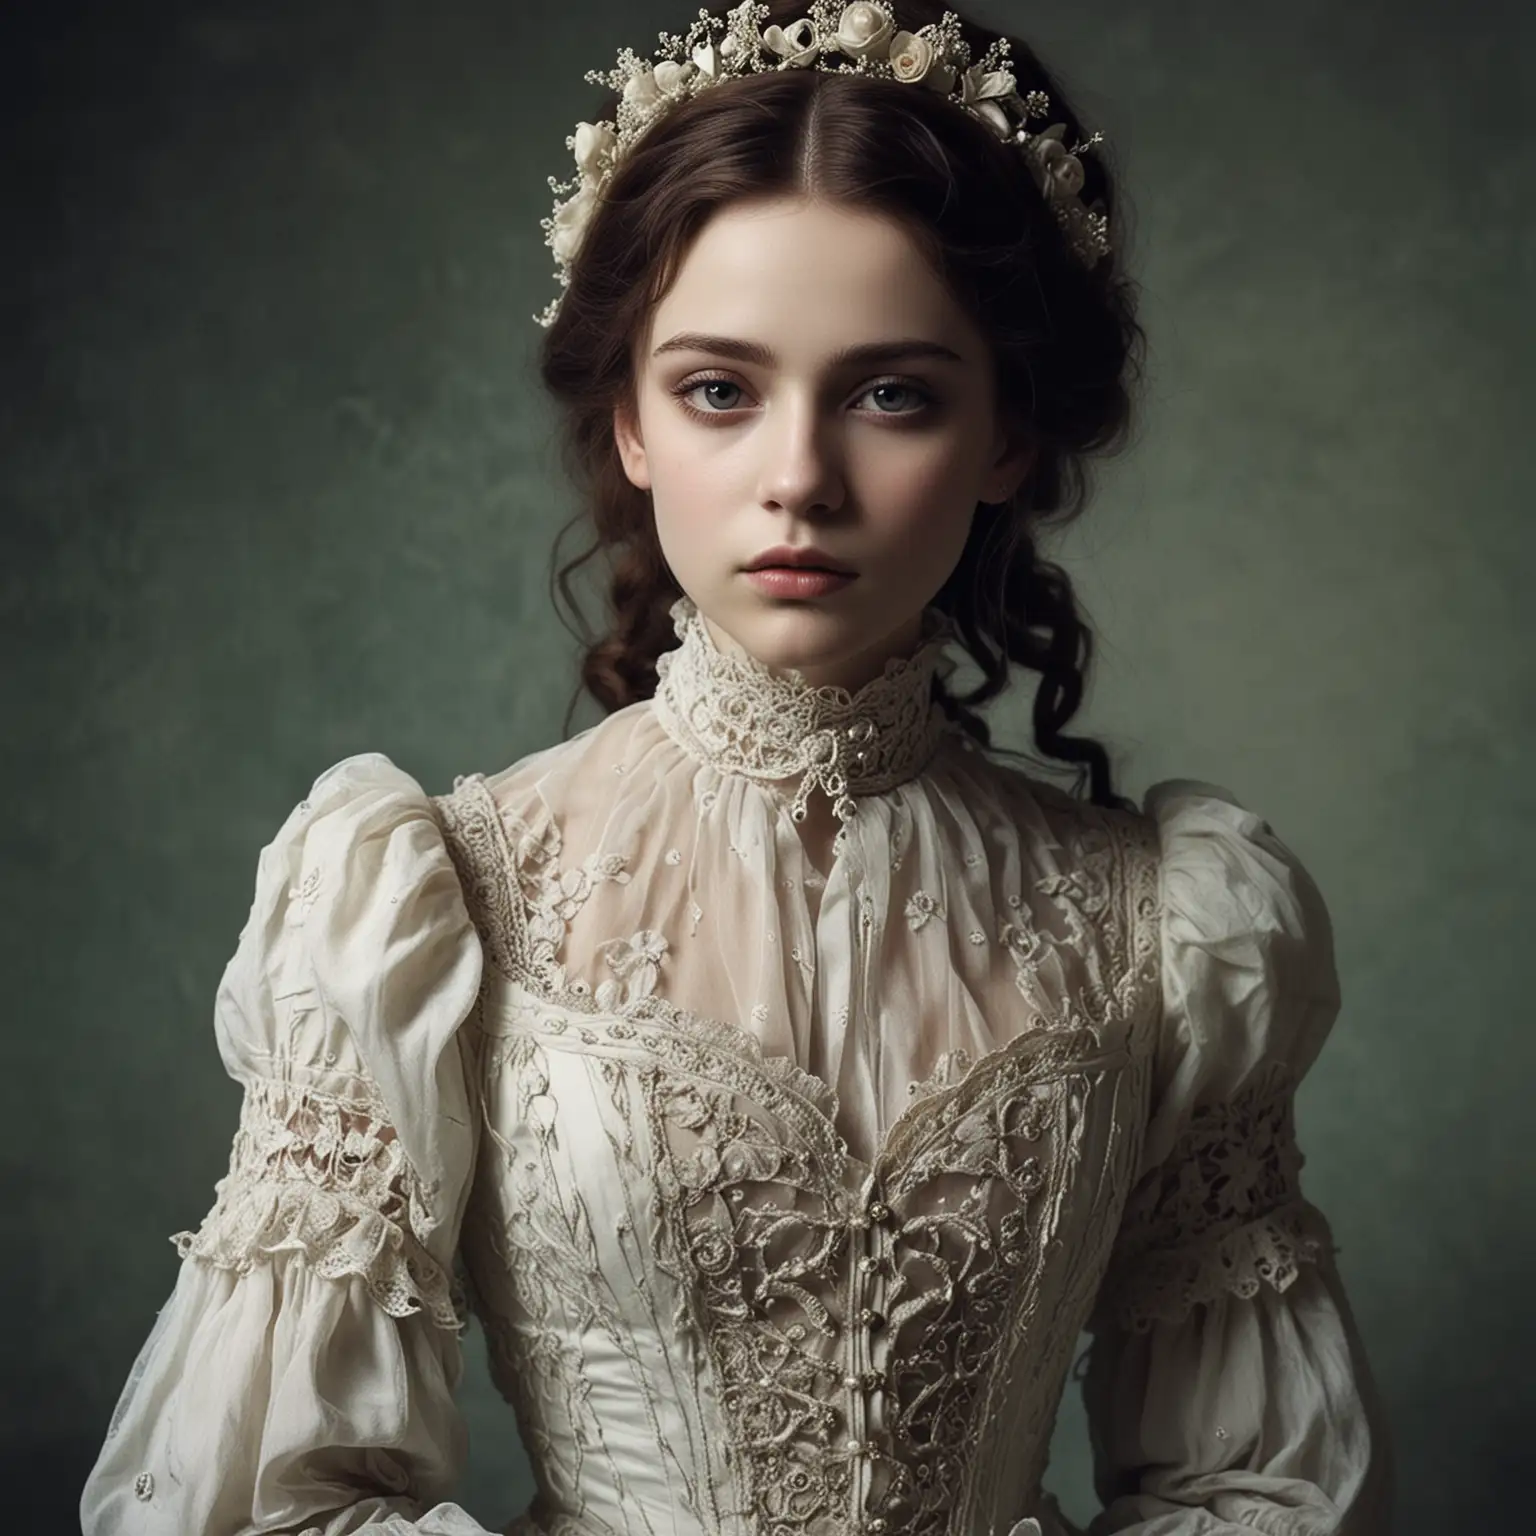 use this image as inspiration for Lydia, who is an ethereal character that Im writing a story about. her character has a haunting beauty and strength. generate images of what lydia looks like and the victorian inpired garments she wears